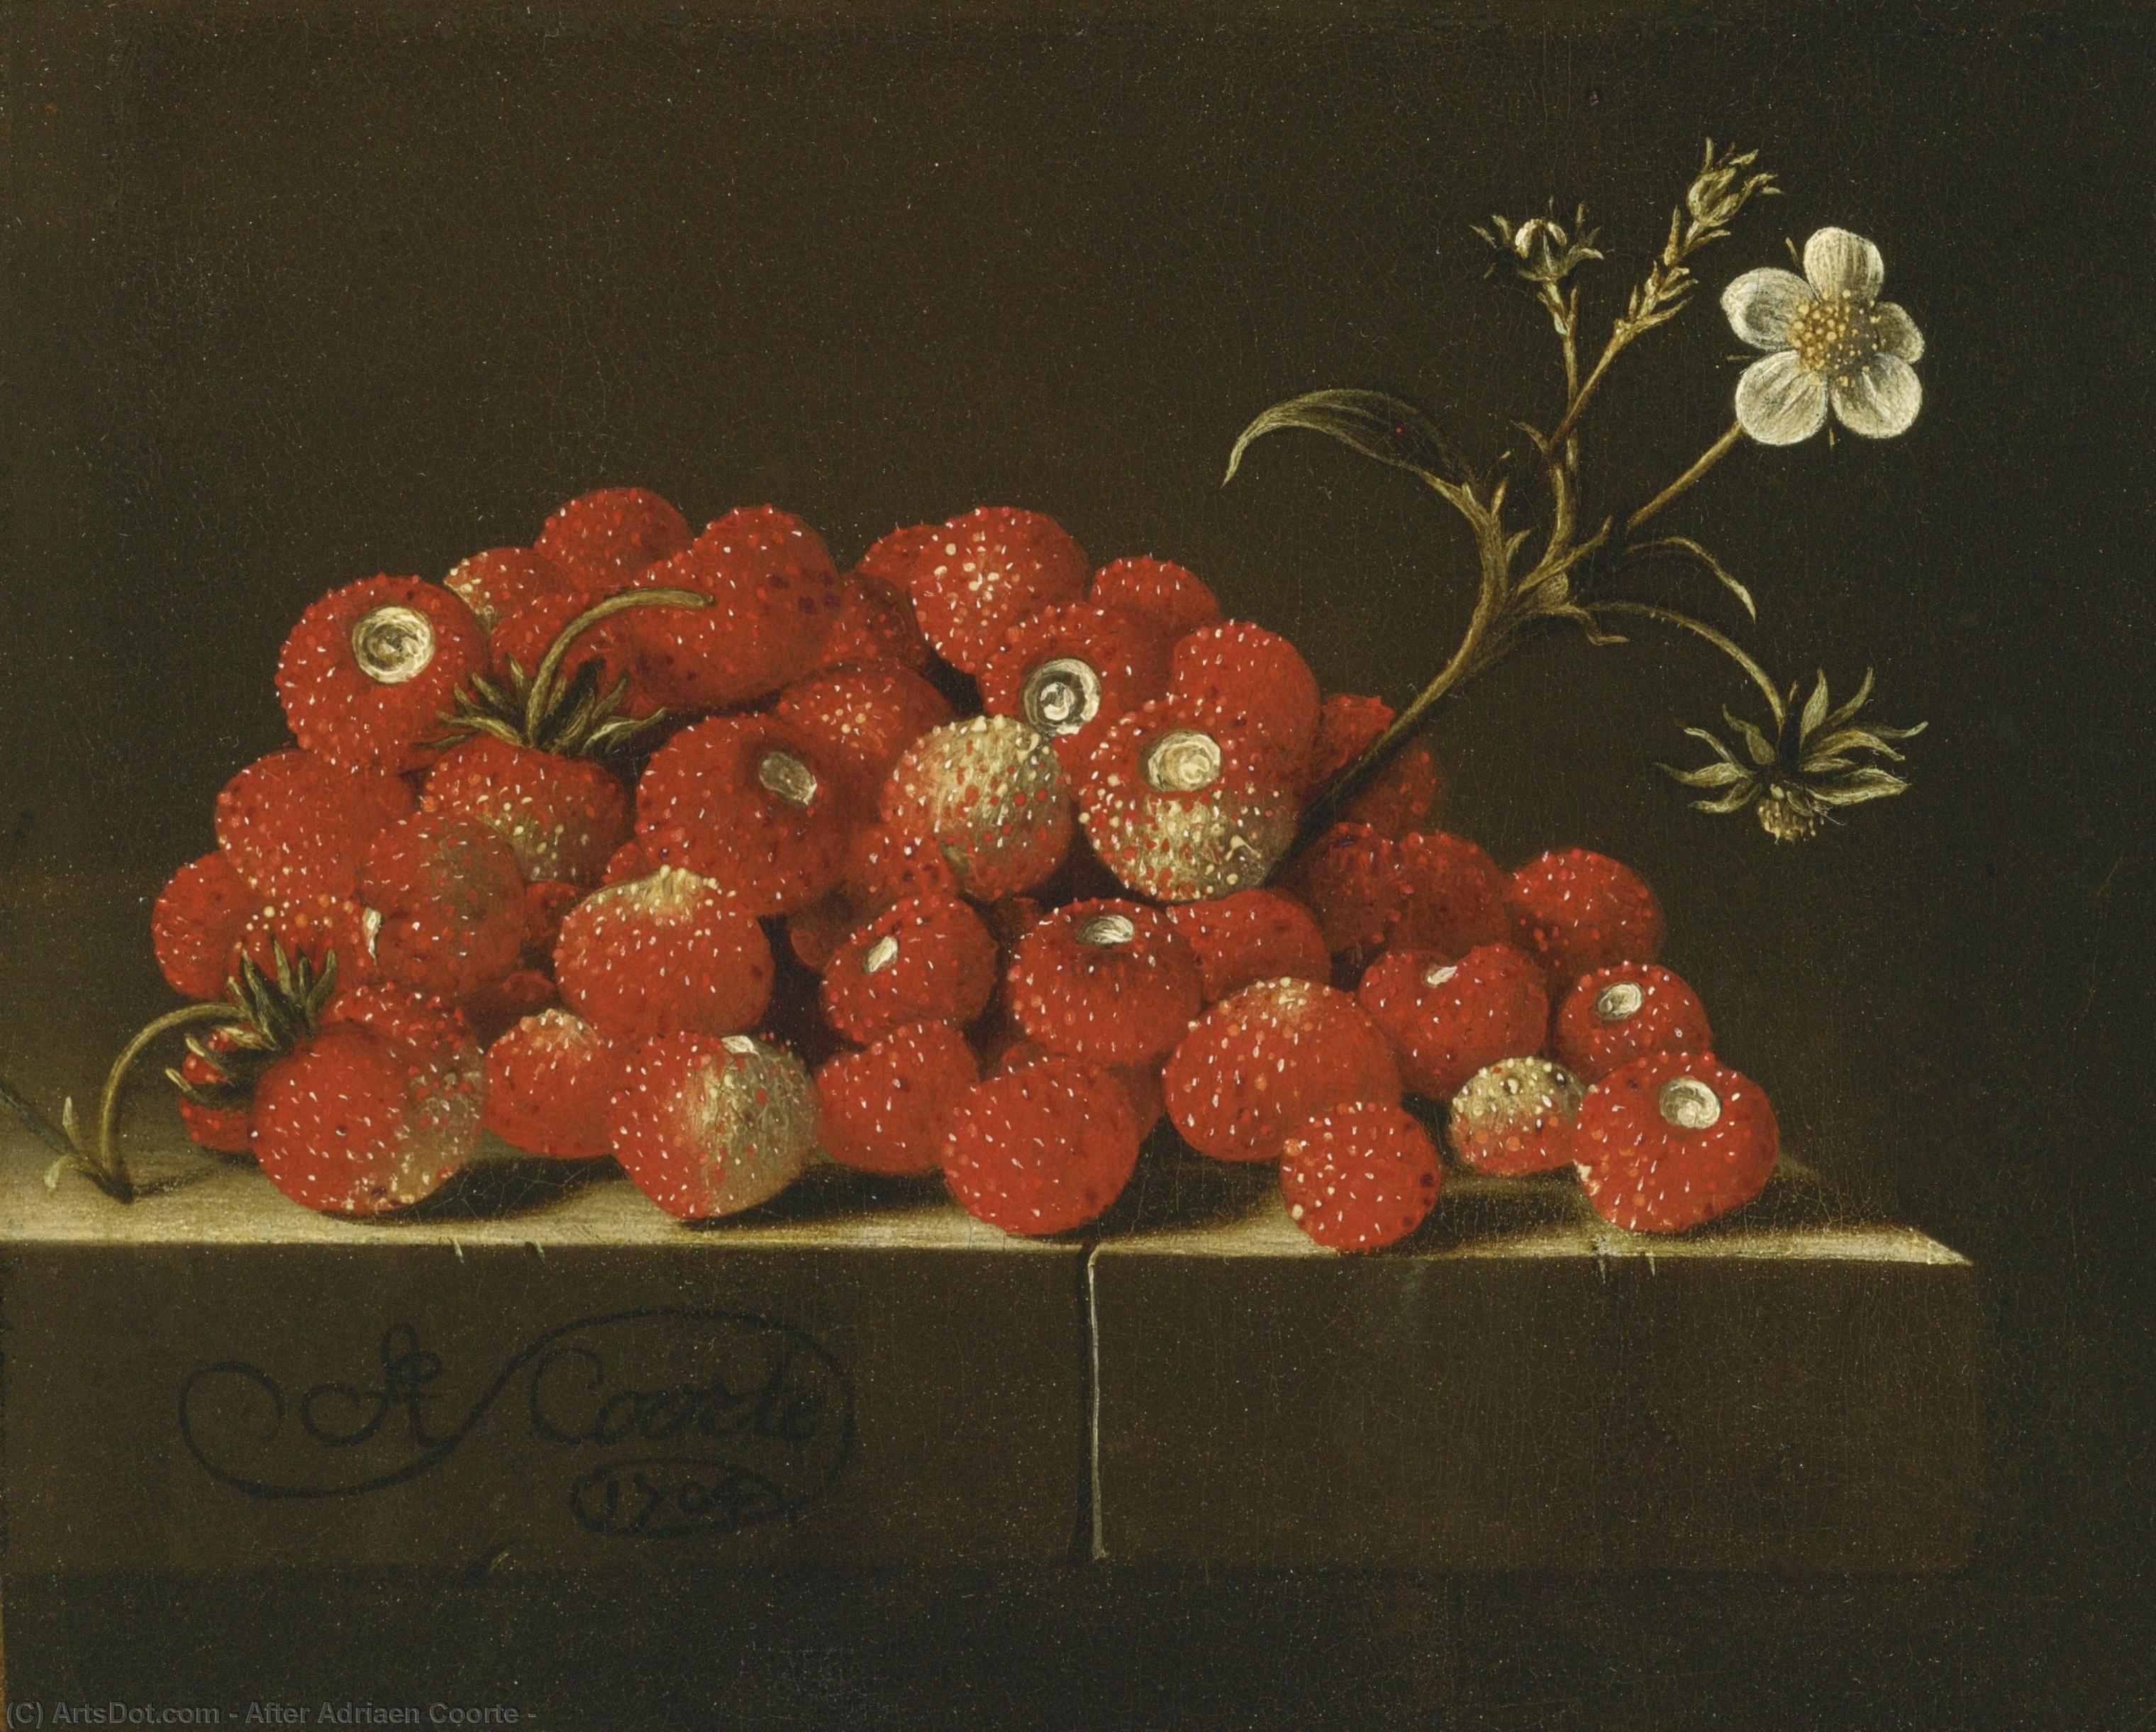 Order Paintings Reproductions , 1704 by After Adriaen Coorte (1665-1707) | ArtsDot.com